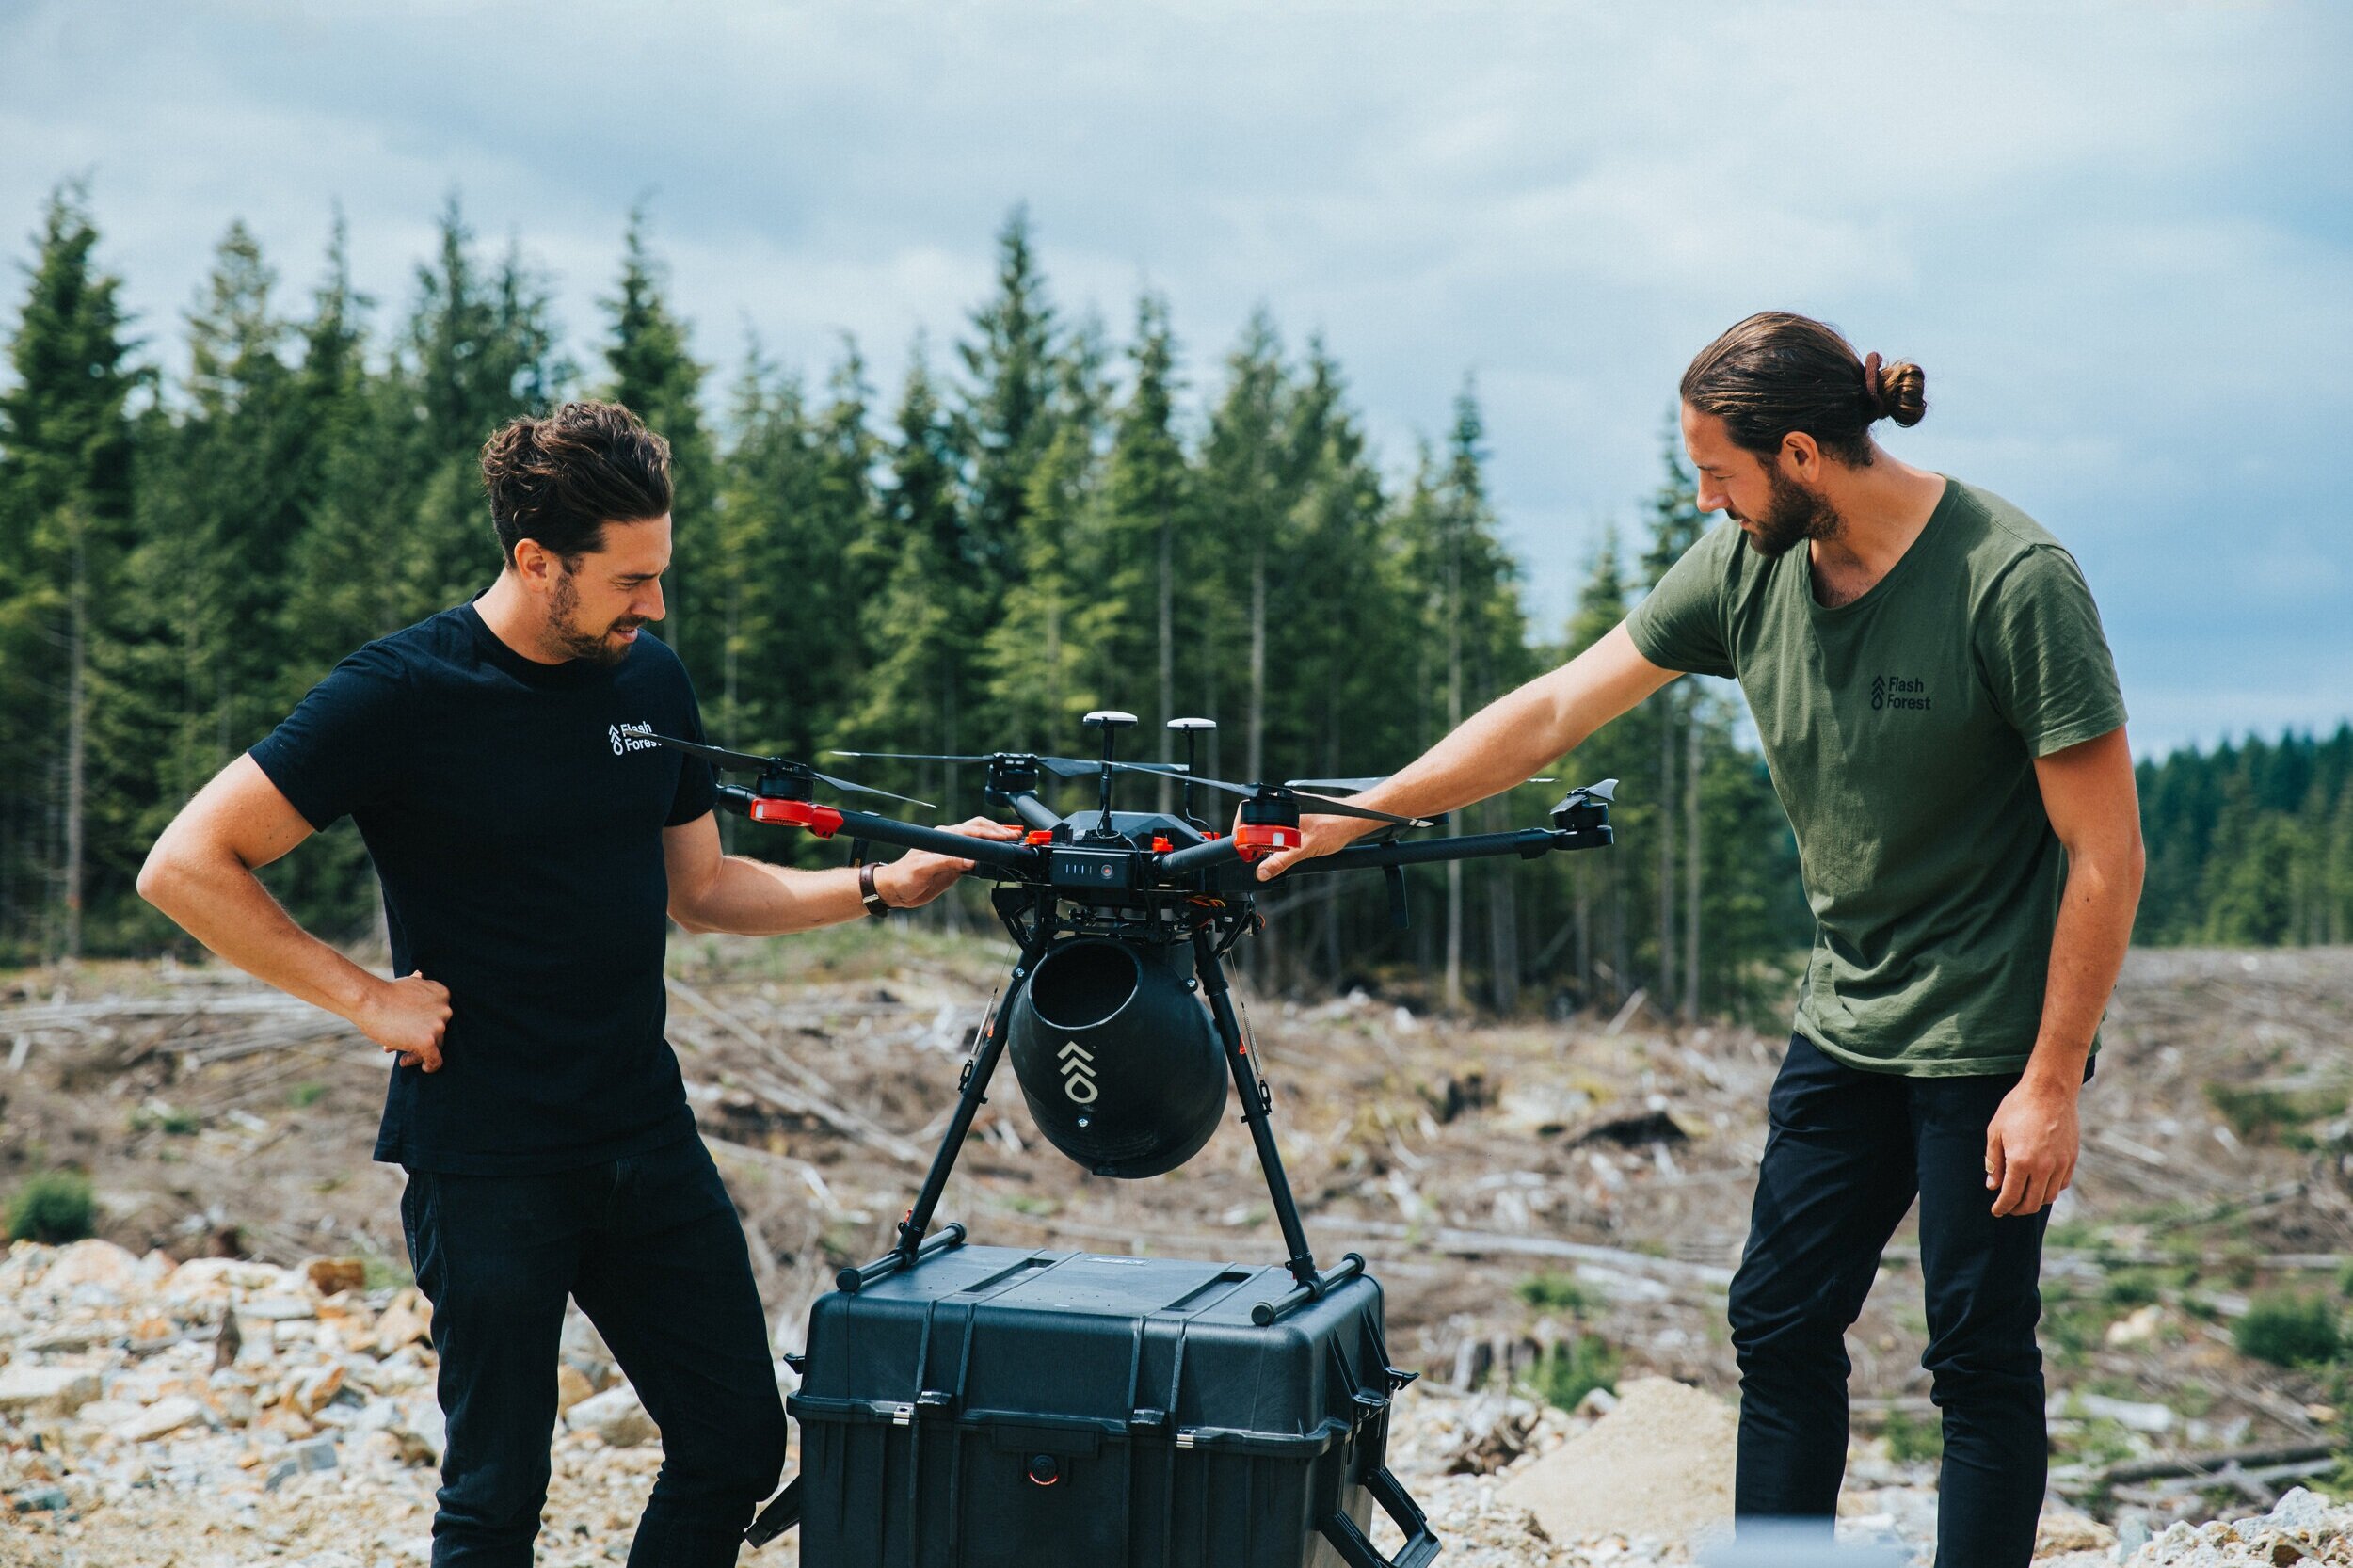 Flash Forest uses drones and other tech to rapidly plant trees. - Flash Forest